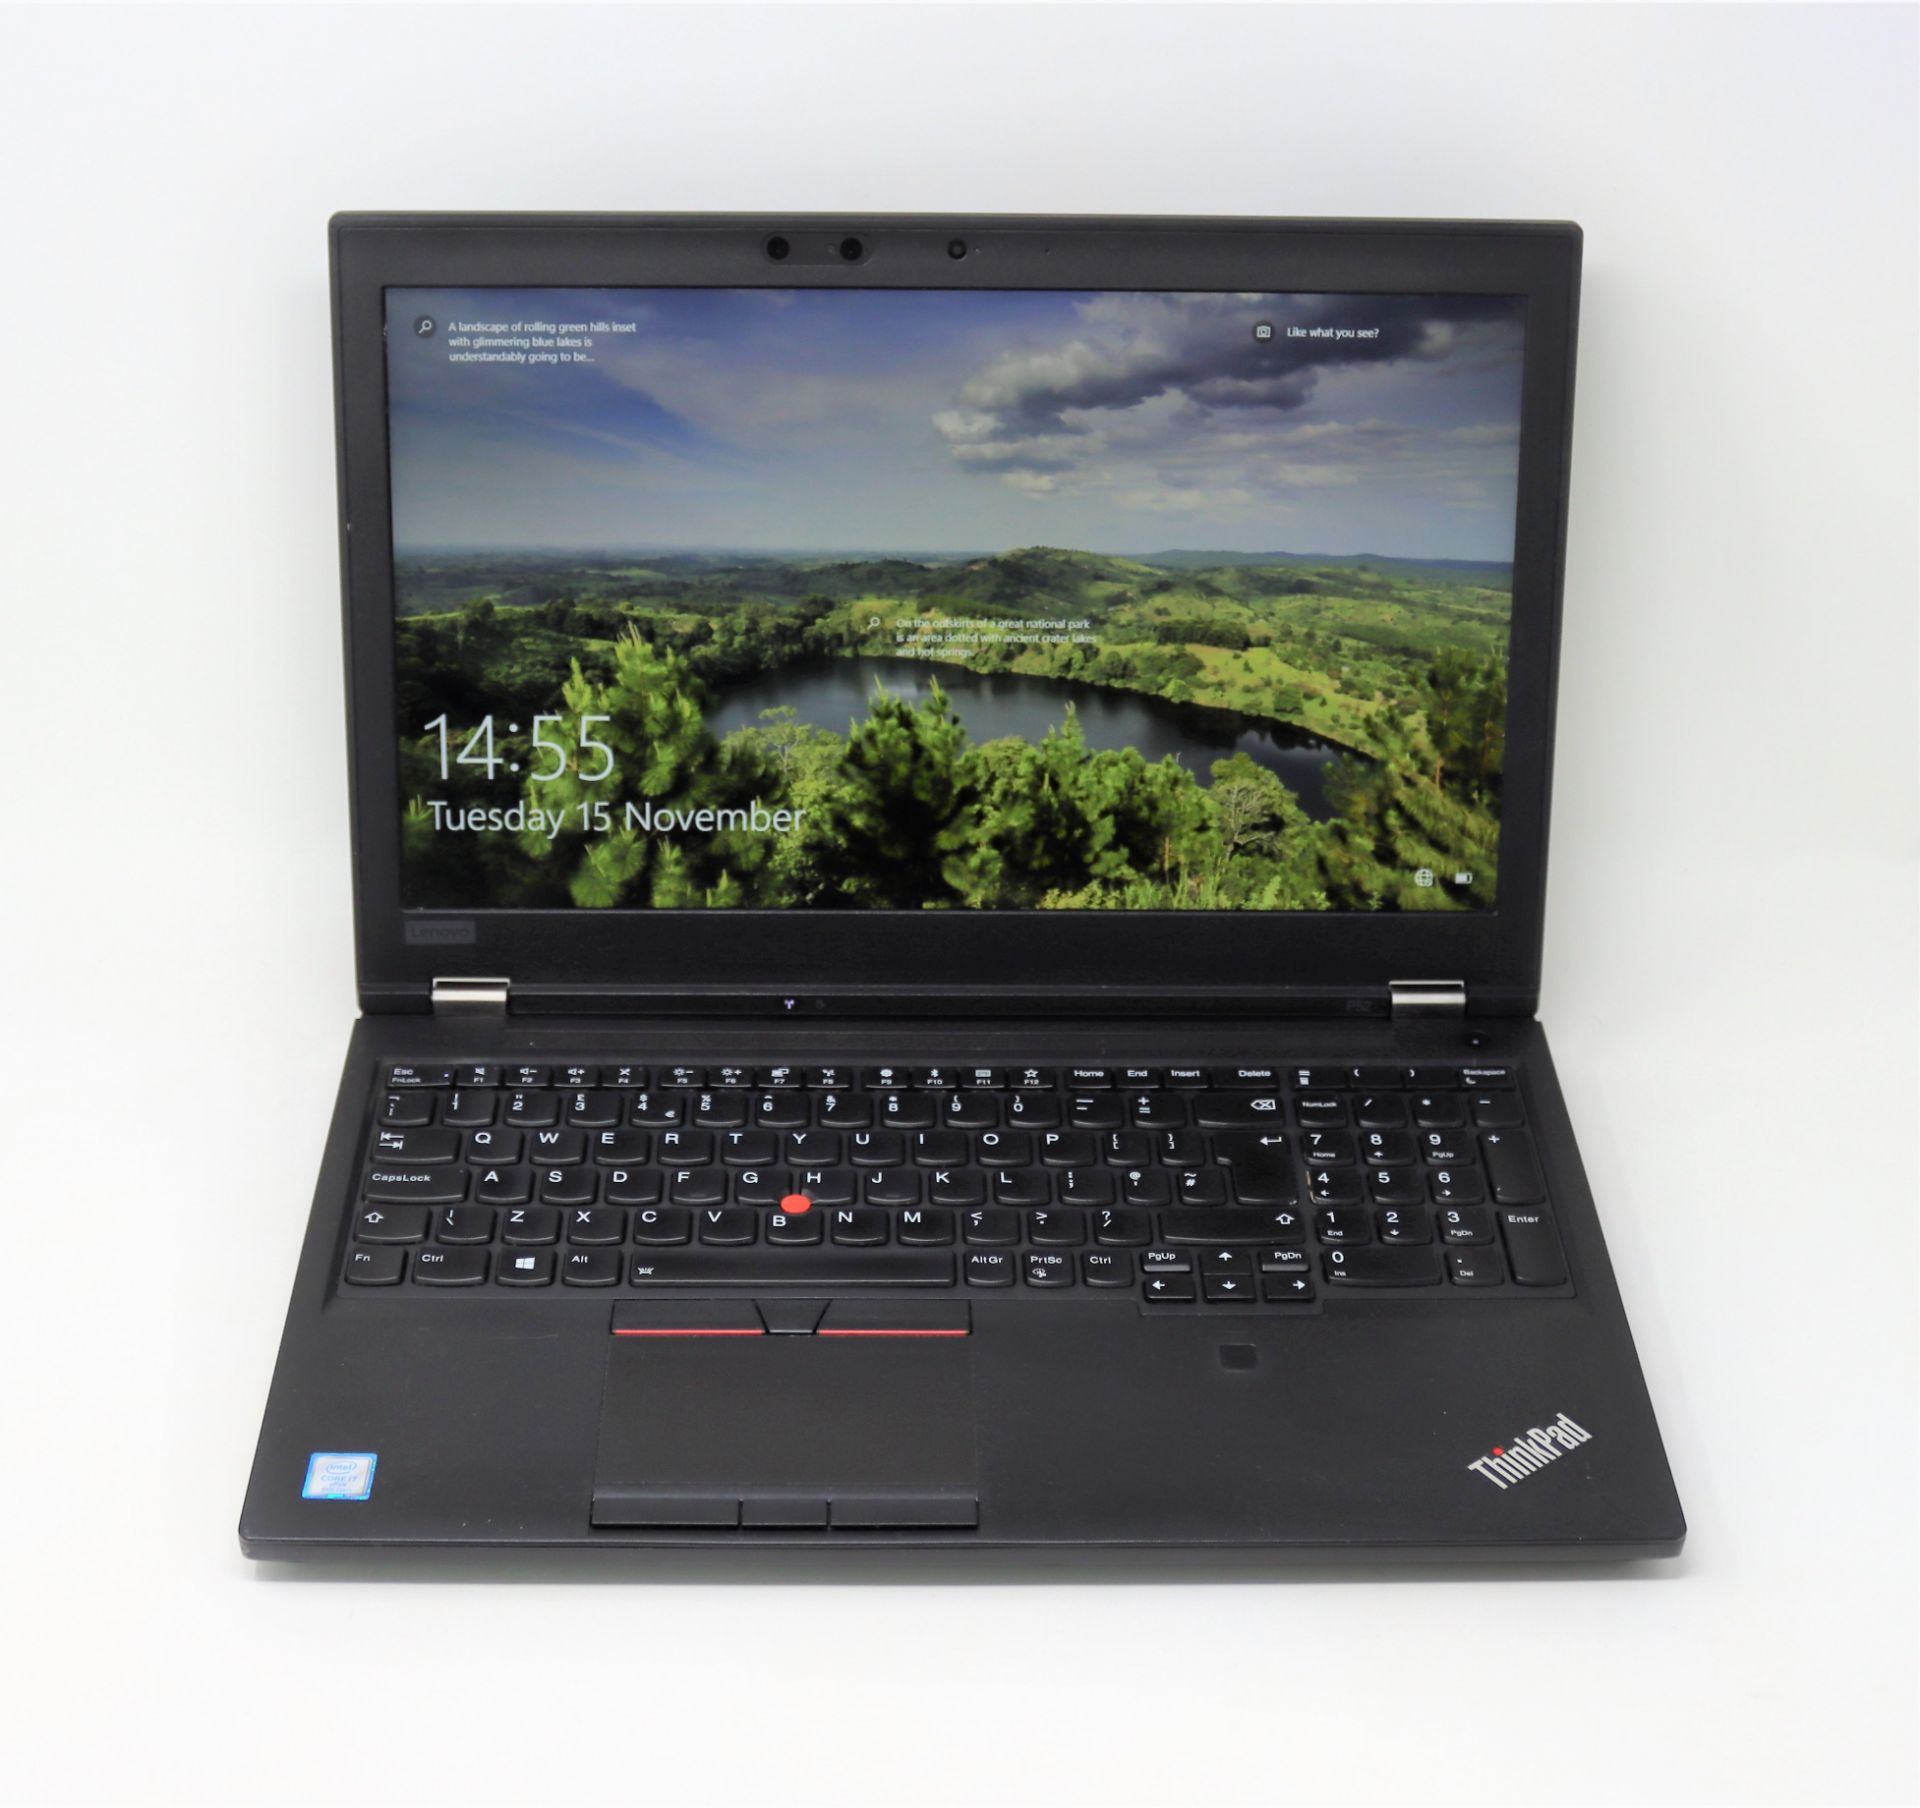 SOLD FOR PARTS: A pre-owned Lenovo ThinkPad P52 15.6" Laptop with Intel Core i7-8850H CPU, 32GB RAM,